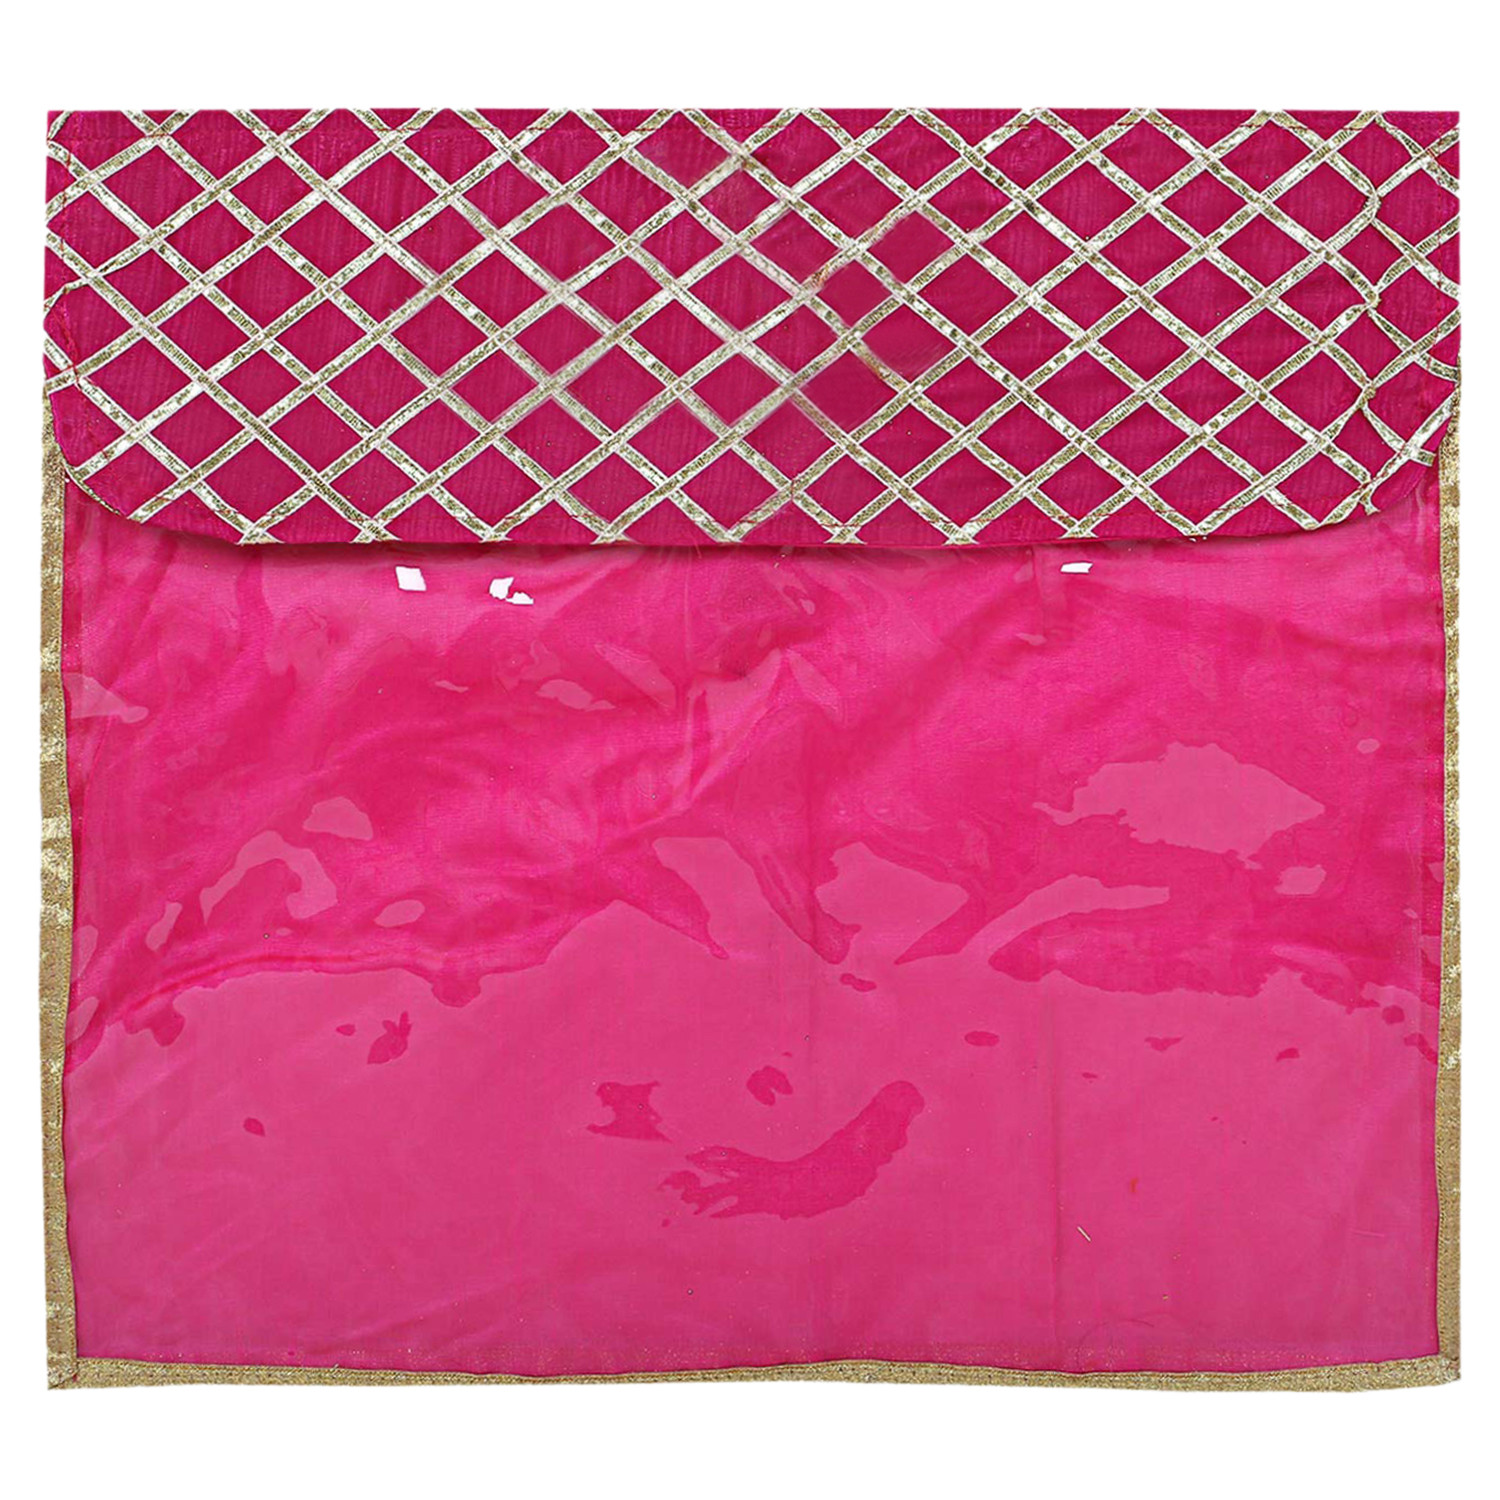 Kuber Industries Seamless lattice Design Satin Foldable, Lightweigth Single Saree Cover/Organiser For Wardrobe With Transparent Top-(Pink)